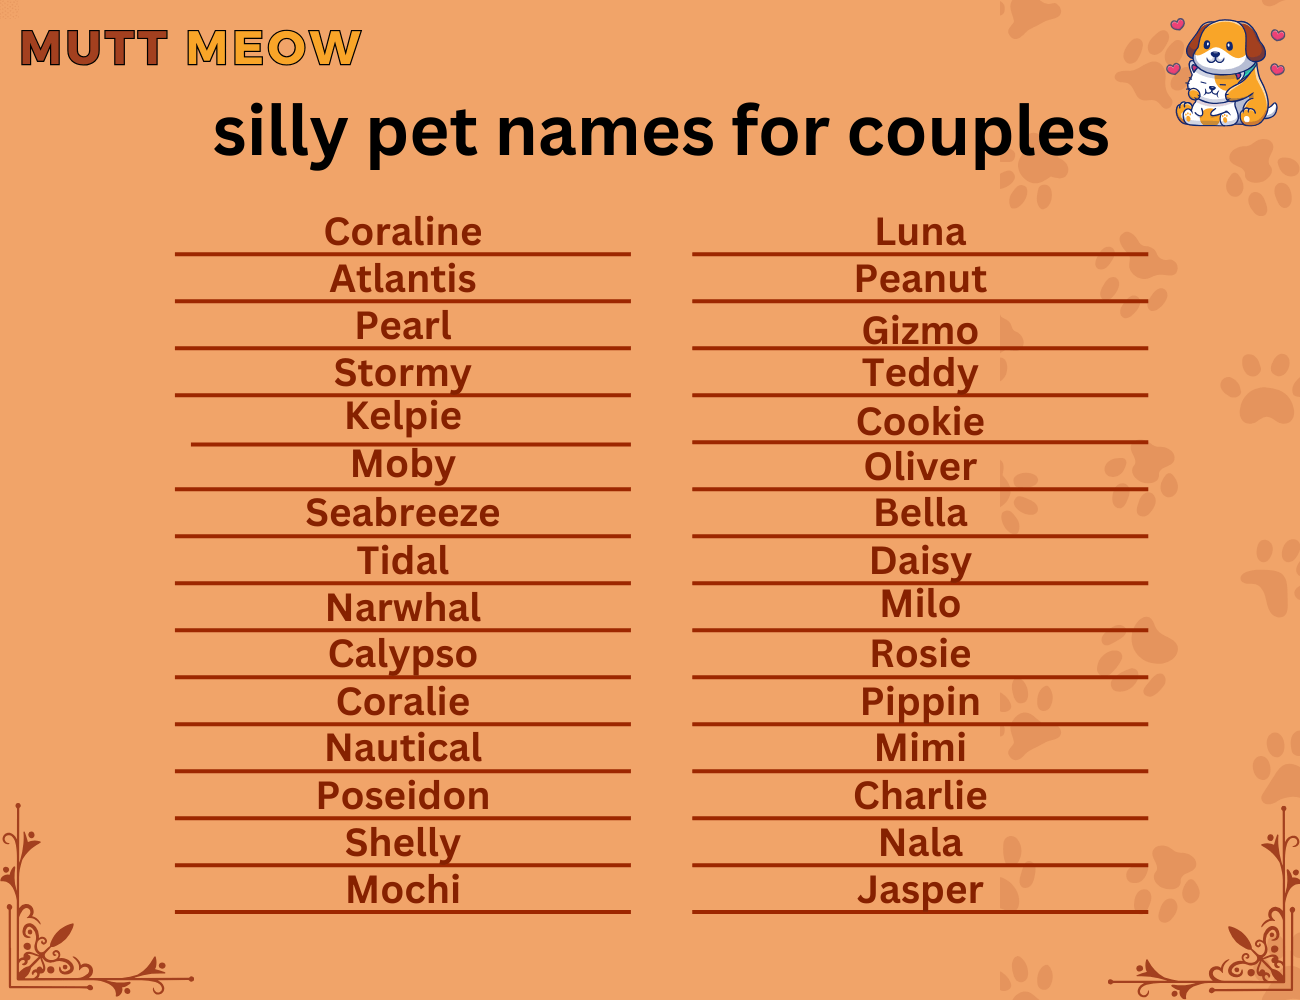 silly pet names for couples